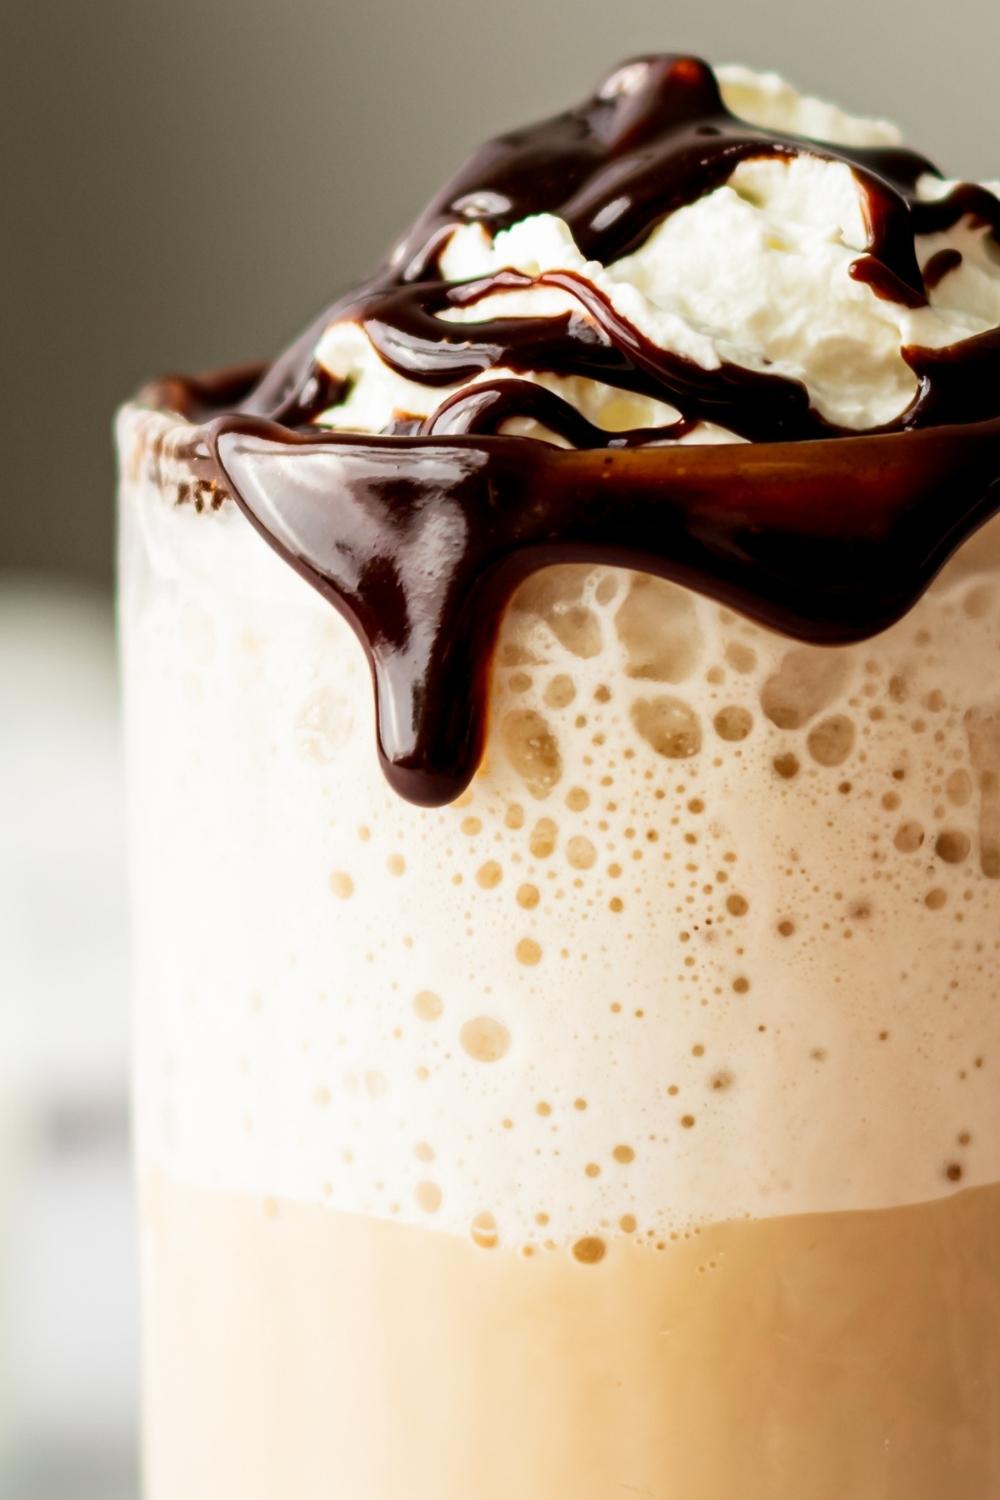 A close-up of homemade McDonald's mocha frappe topped with whipped cream and chocolate drizzle.